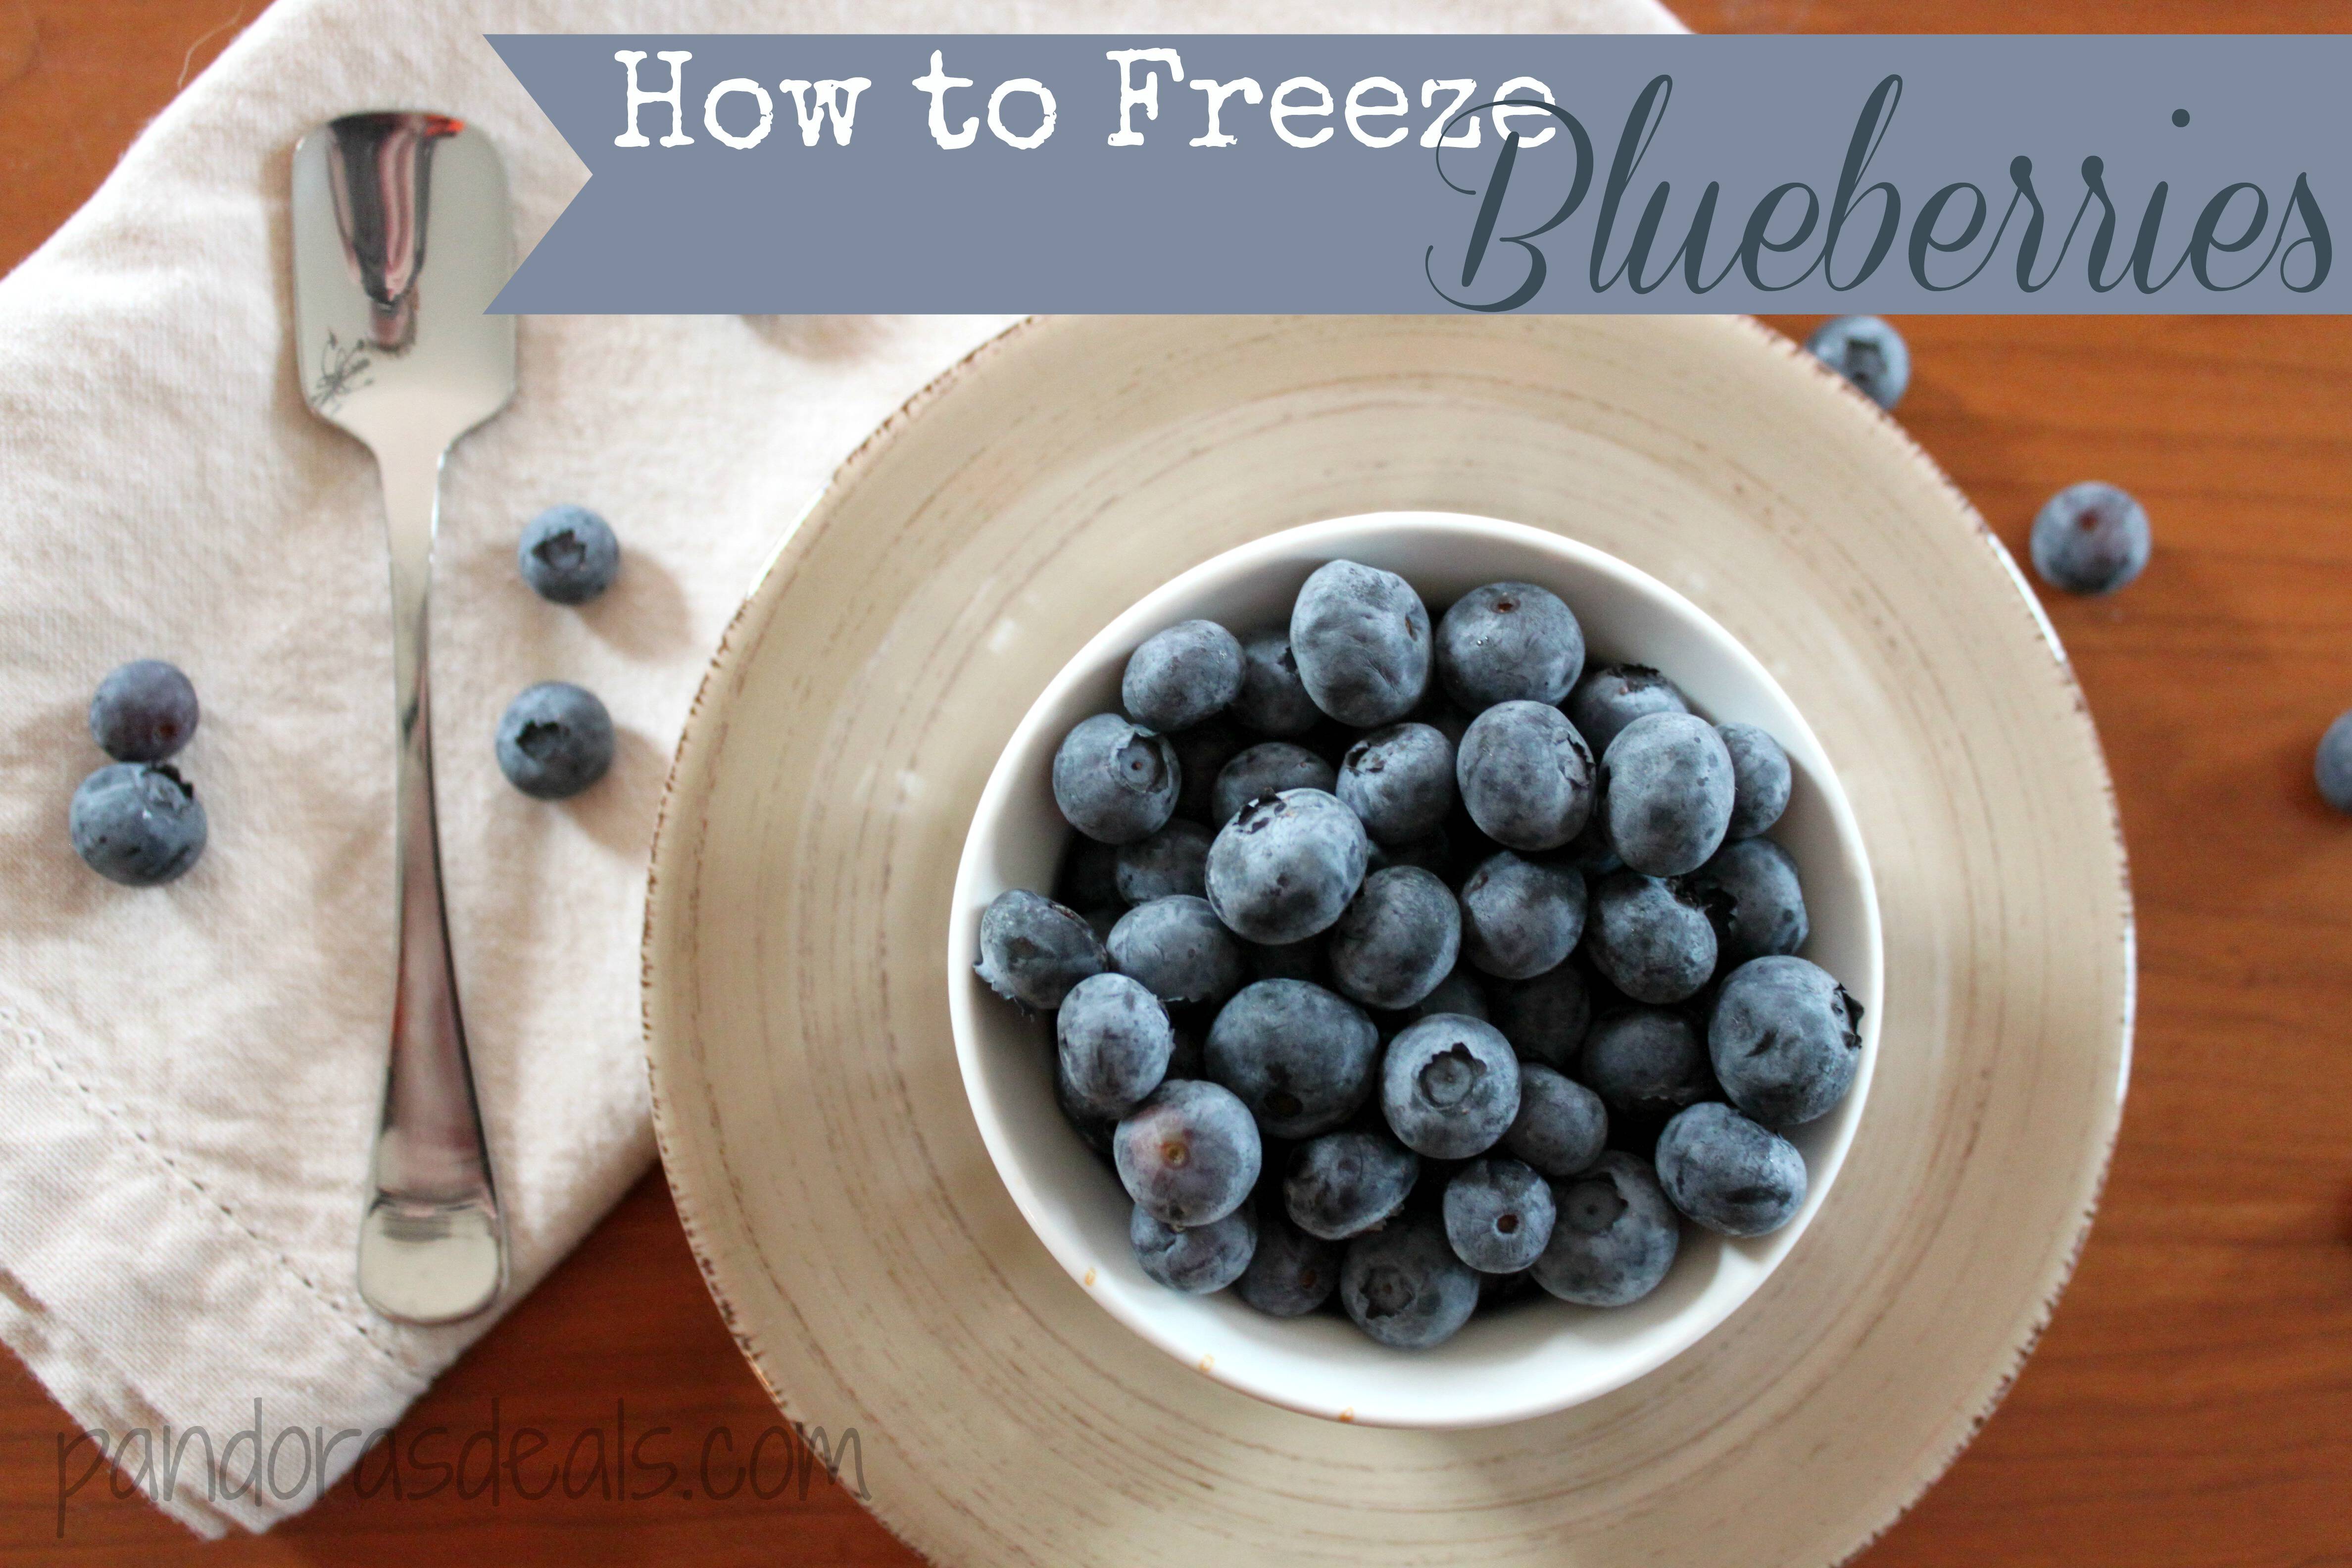 Learn how to freeze blueberries in 4 easy steps. Grab a bunch while they're cheap and in-season and freeze them for use over the winter. Great for baking!